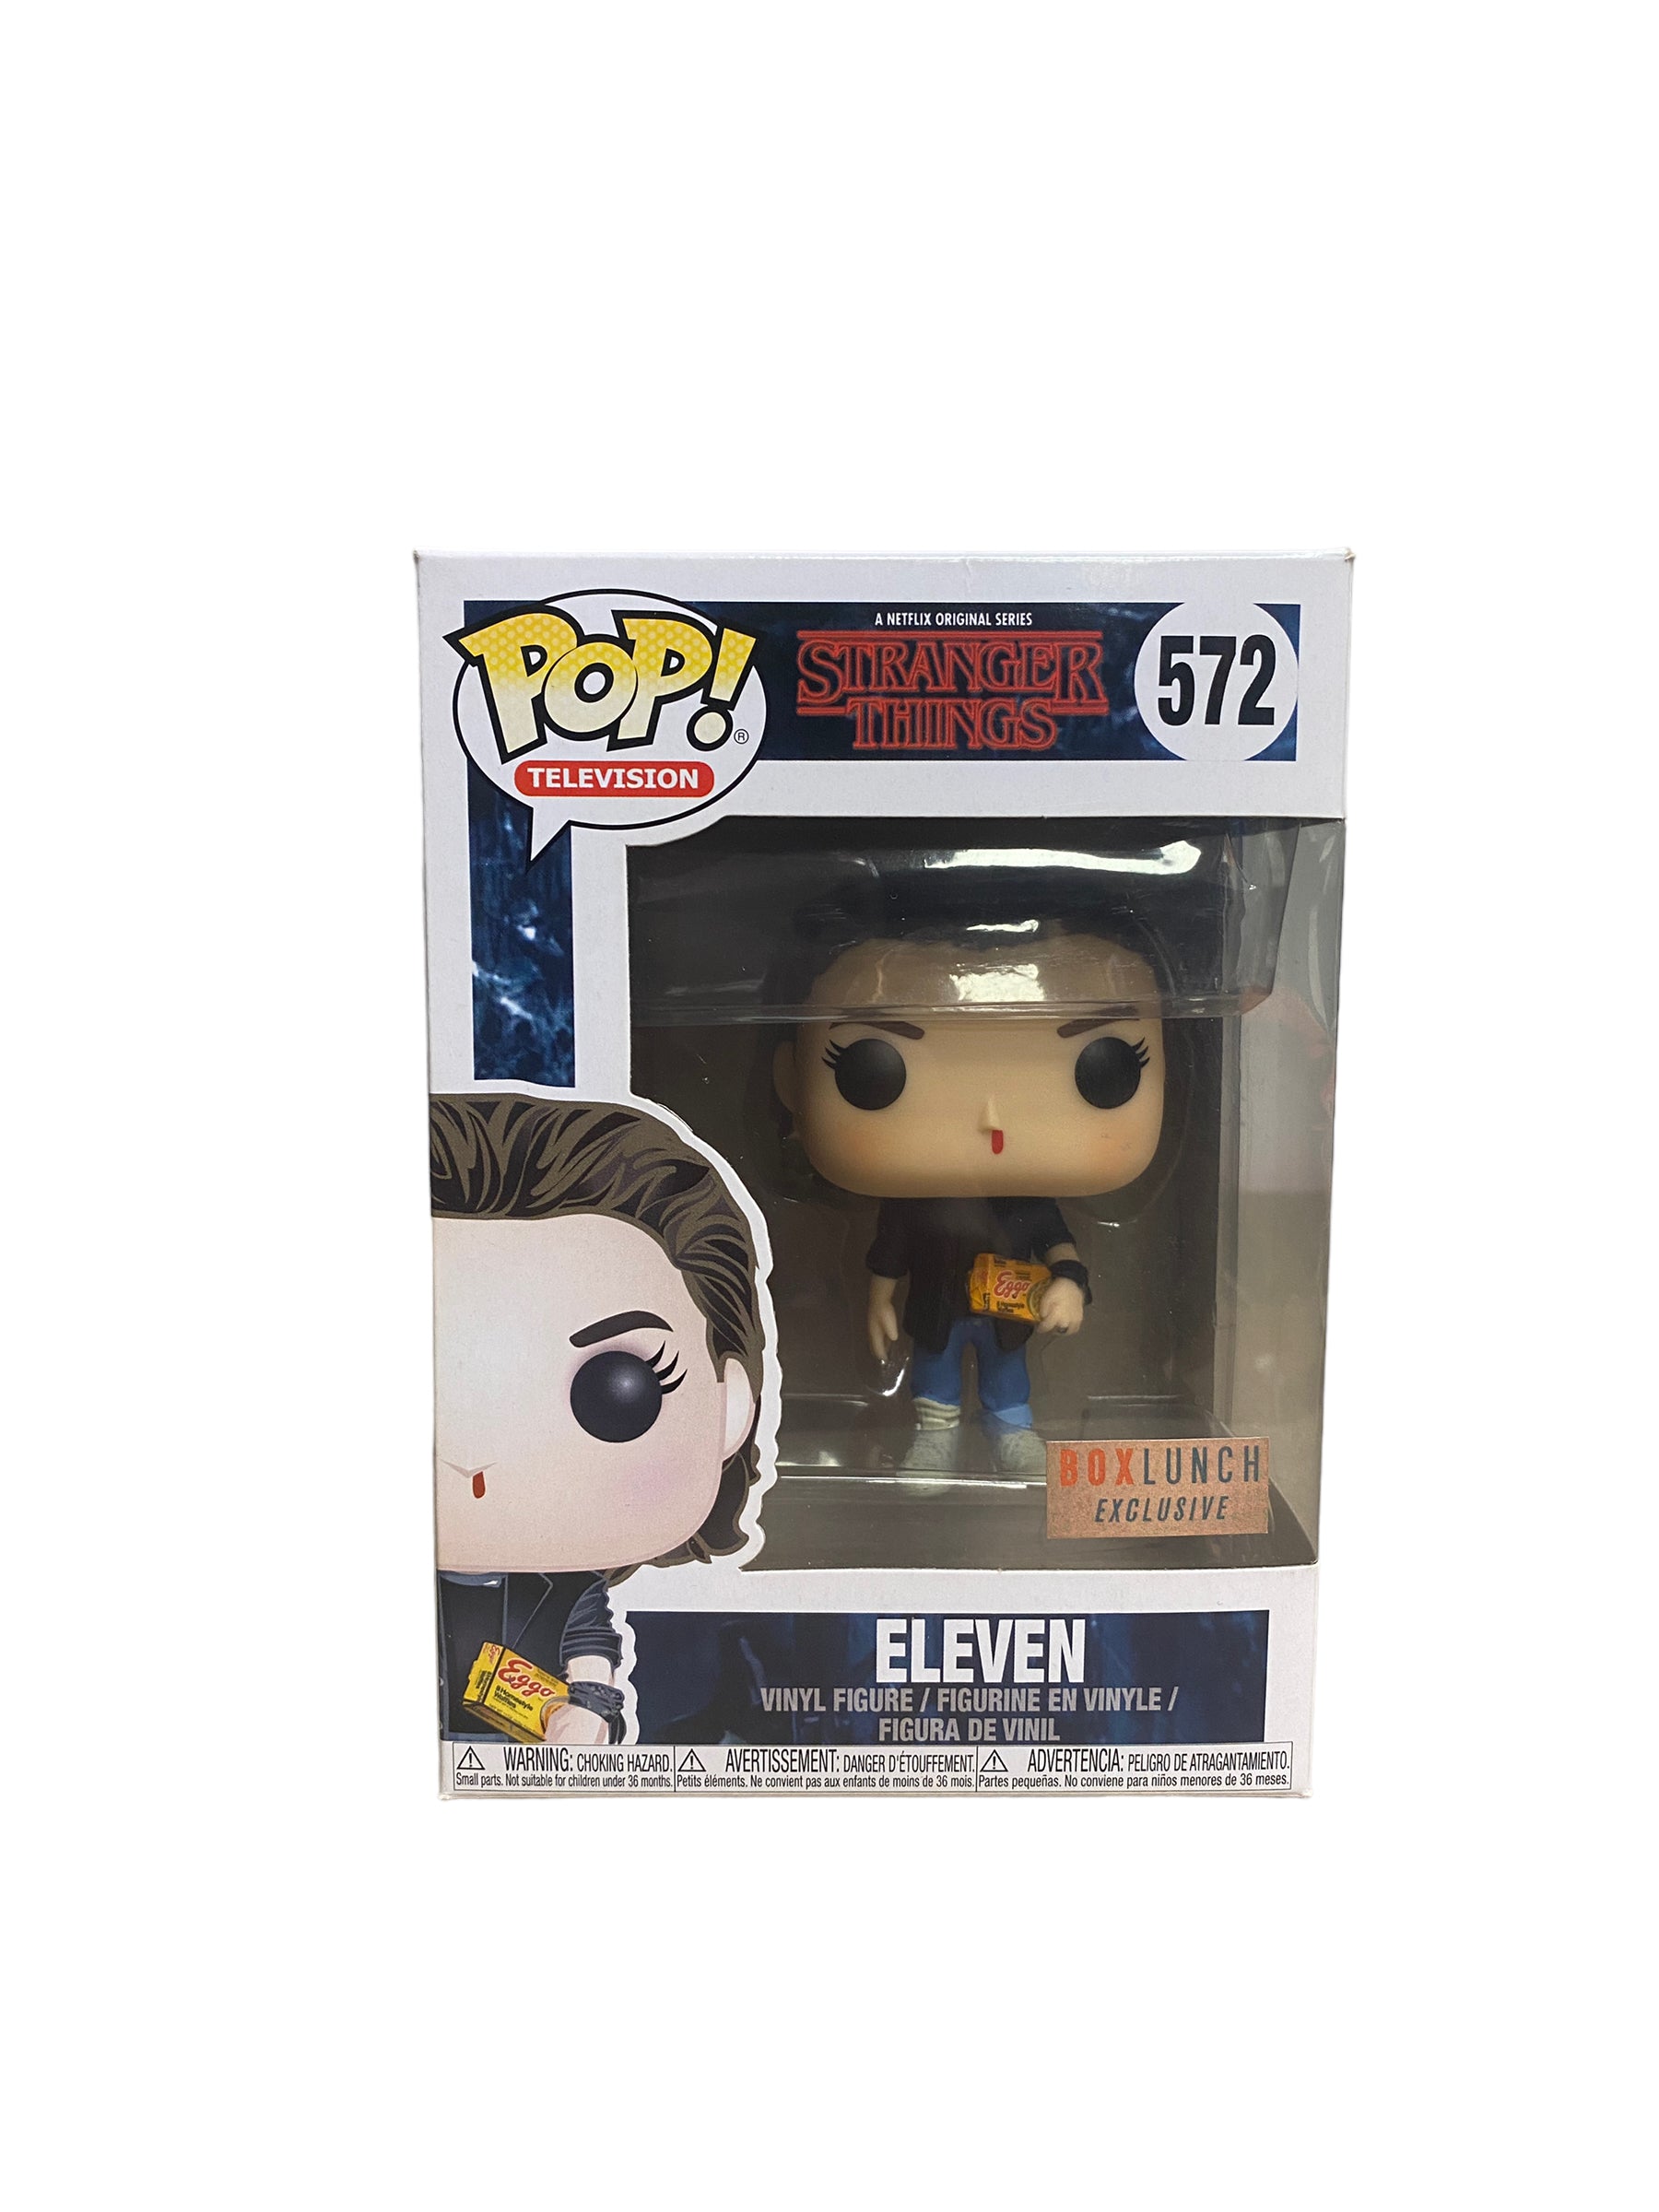 Eleven #572 (Punk) Funko Pop! - Stranger Things - Box Lunch Exclusive - Condition 7/10